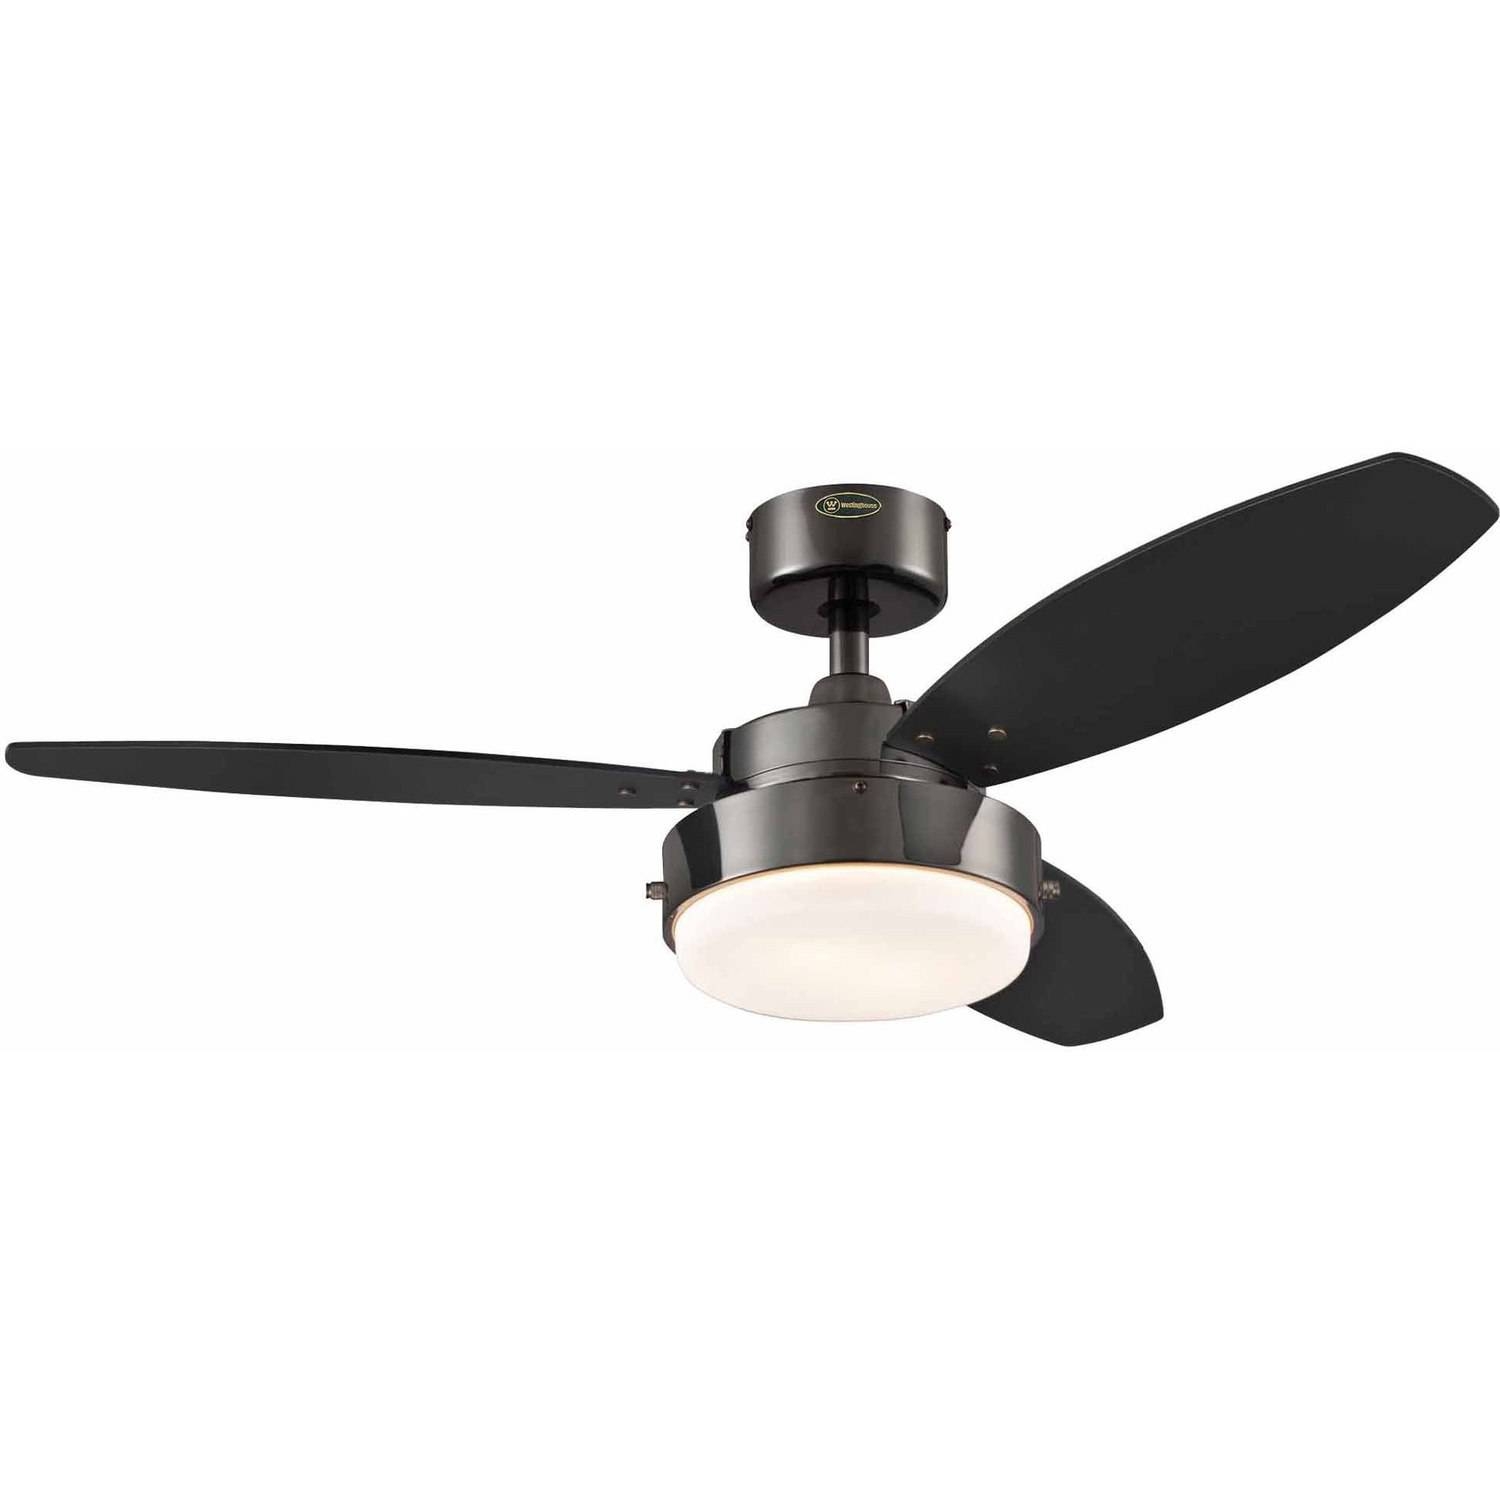 42 Ceiling Fan With Light And Remote42 ceiling fan with light and remote ceiling lights